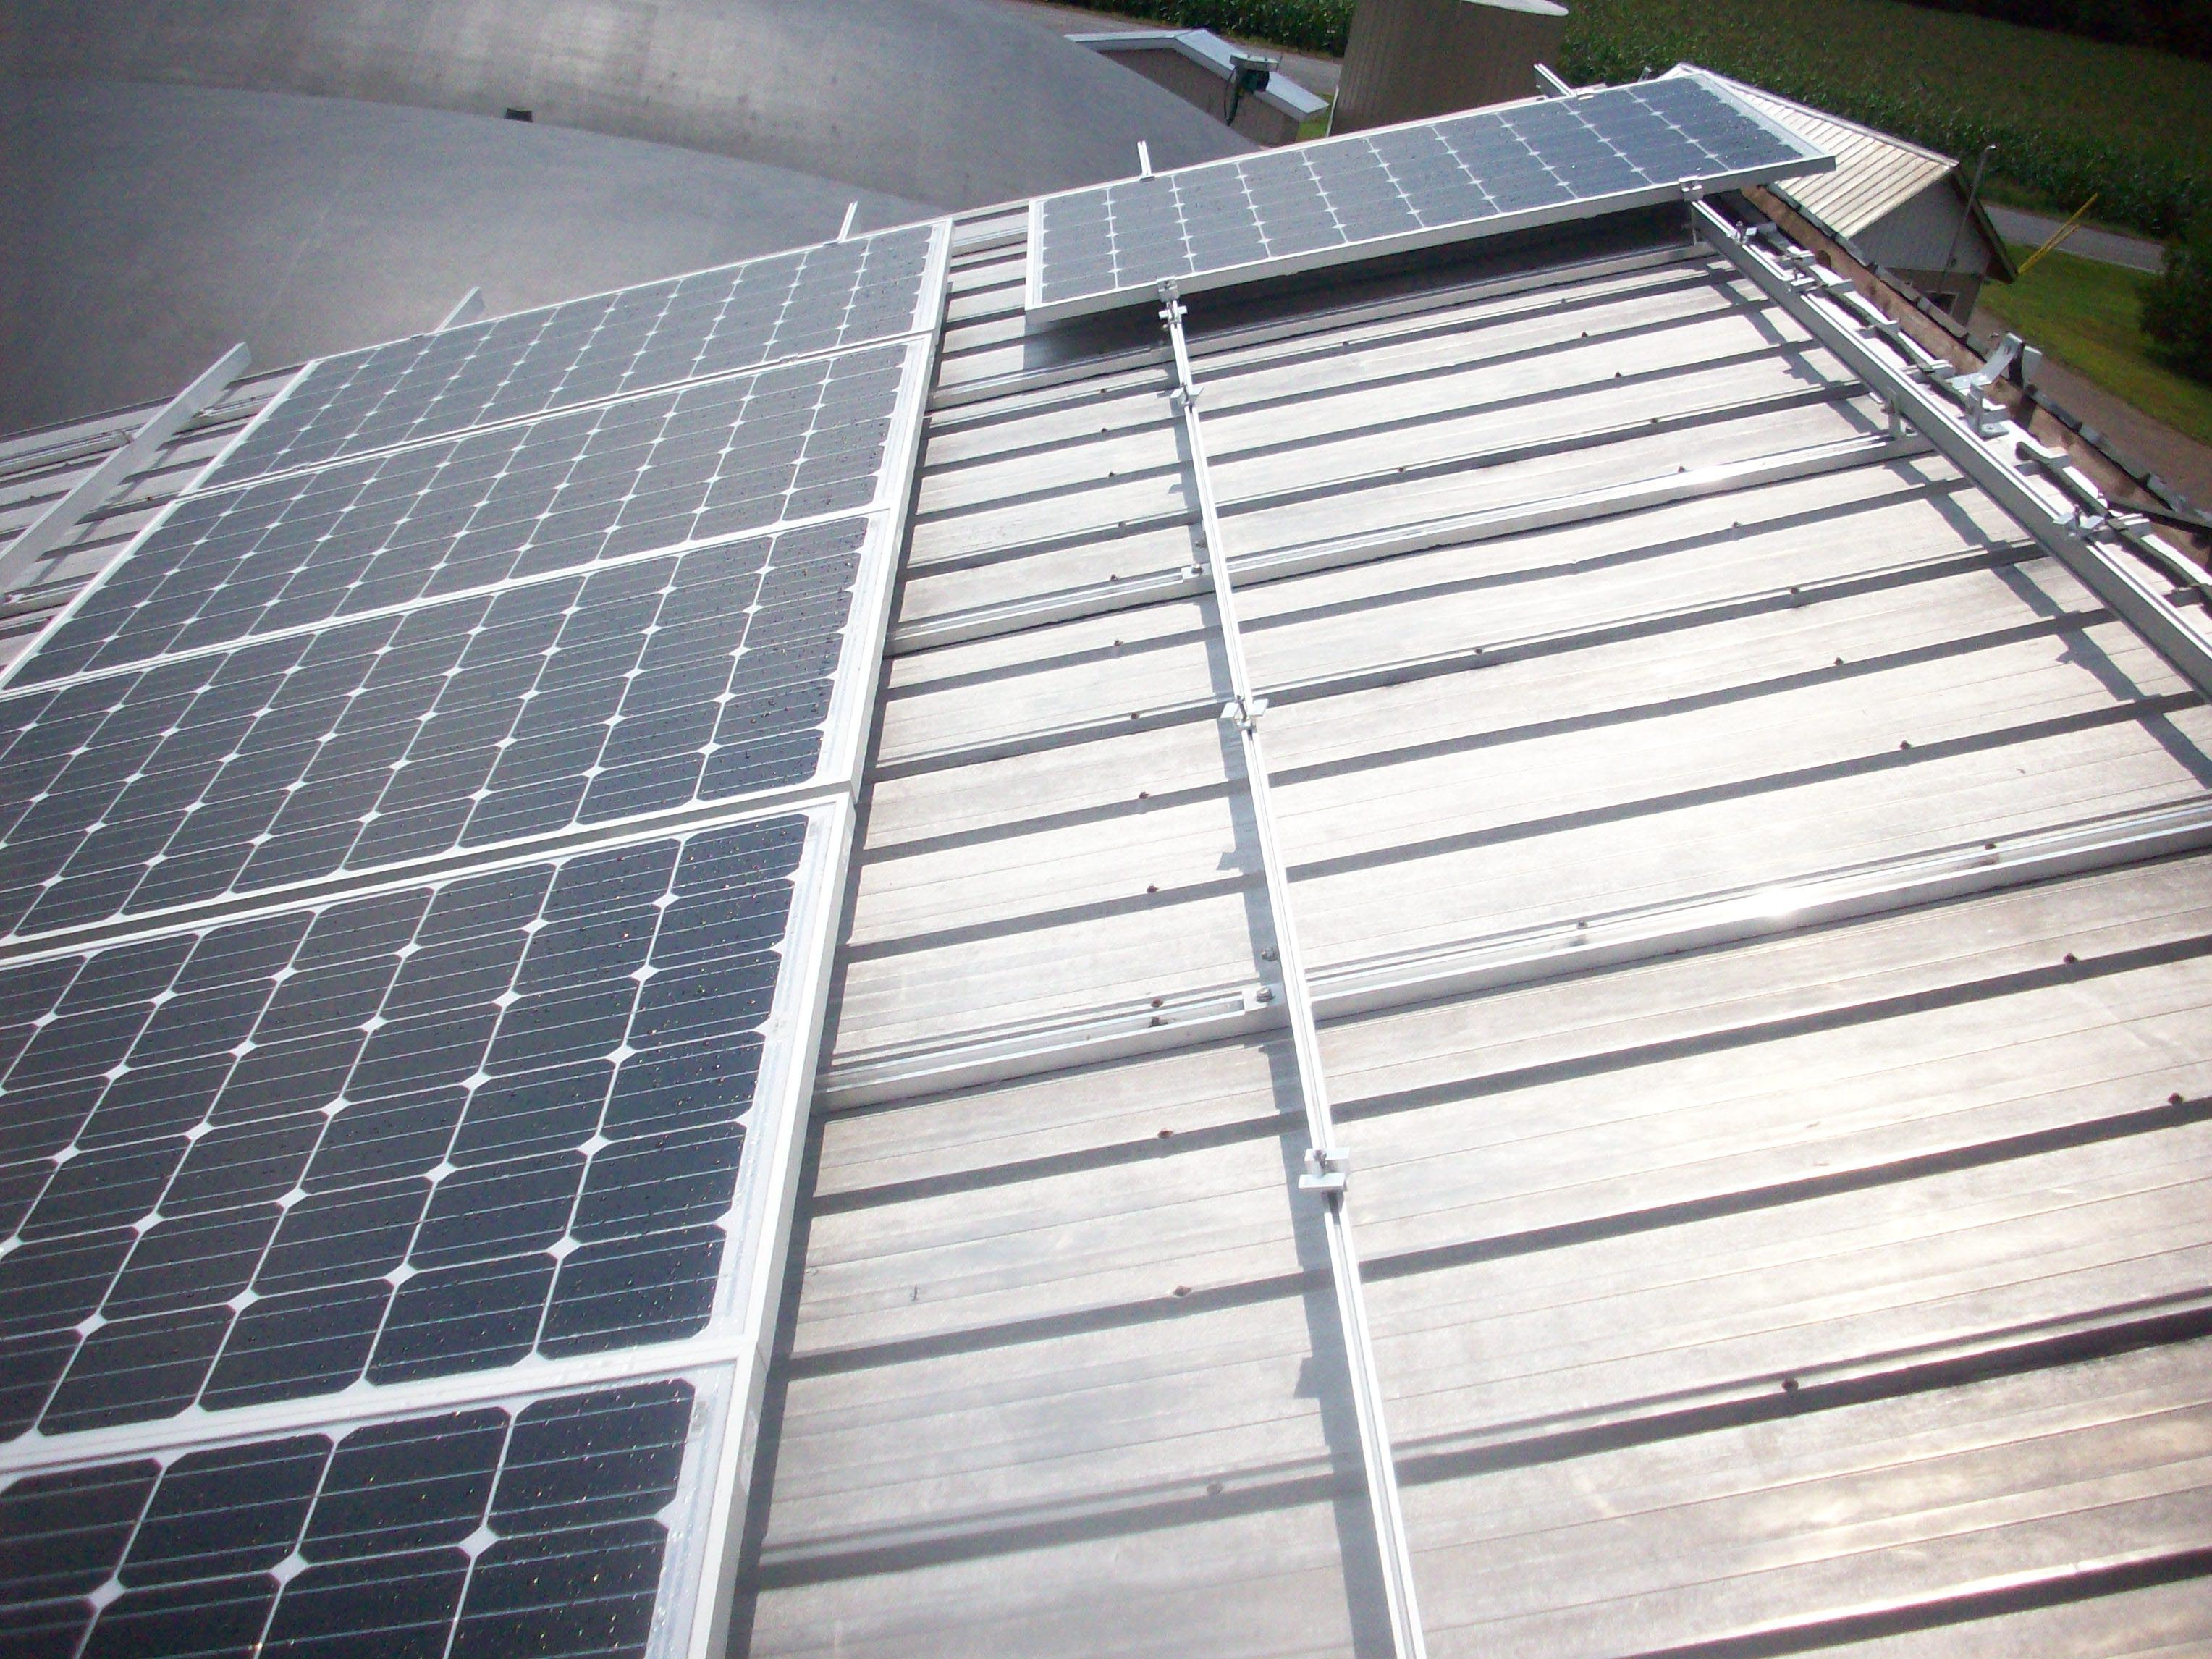 solar panel installation with rows for maintenance access and ventilation. Panels are crystalline silicon modules